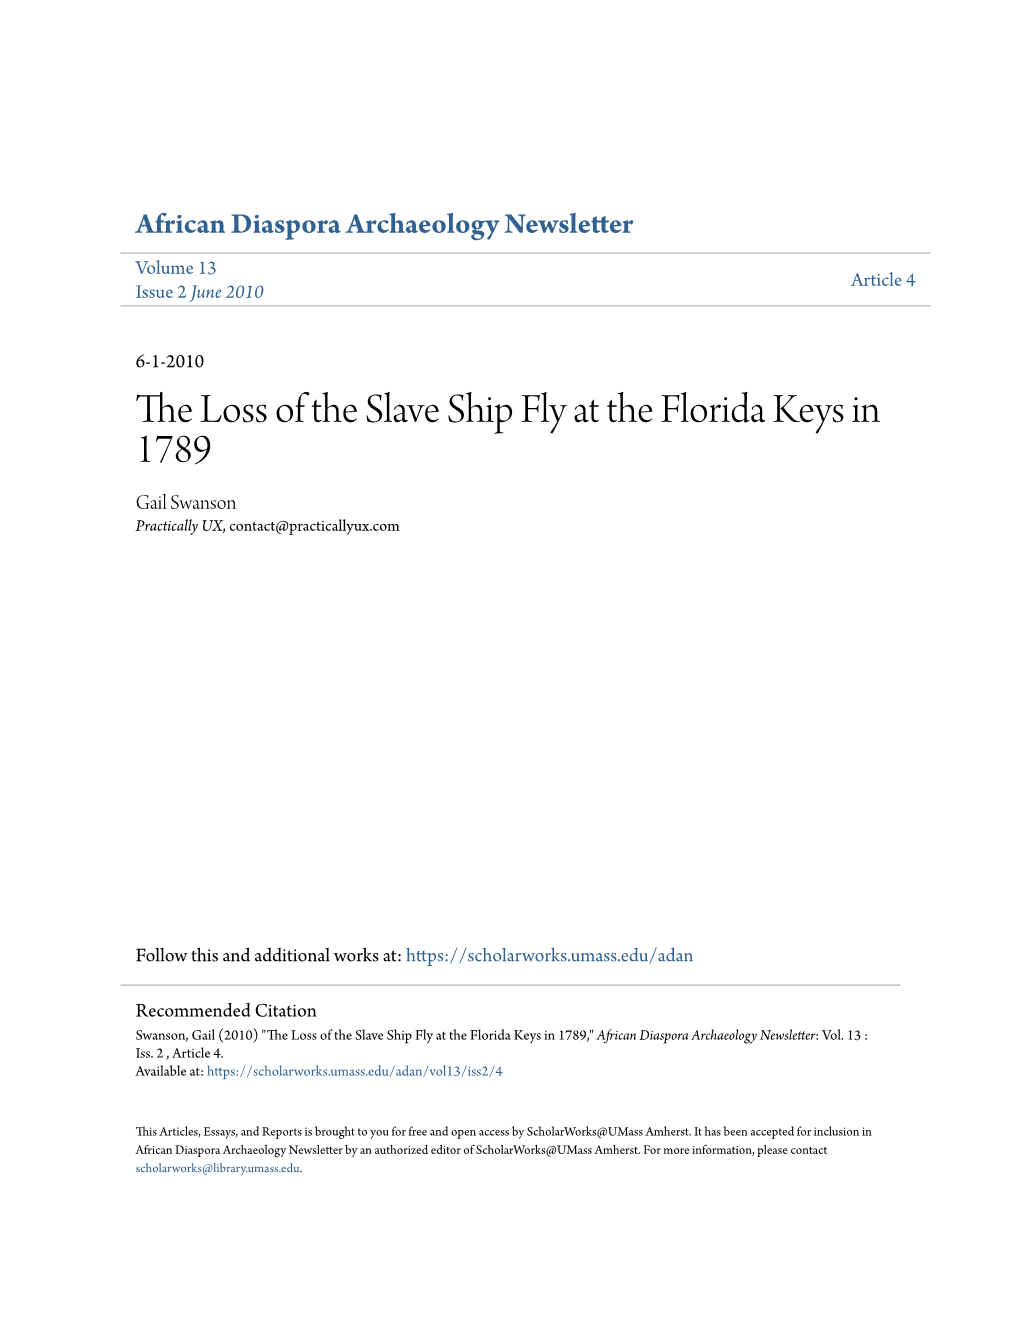 The Loss of the Slave Ship Fly at the Florida Keys in 1789 Gail Swanson Practically UX, Contact@Practicallyux.Com